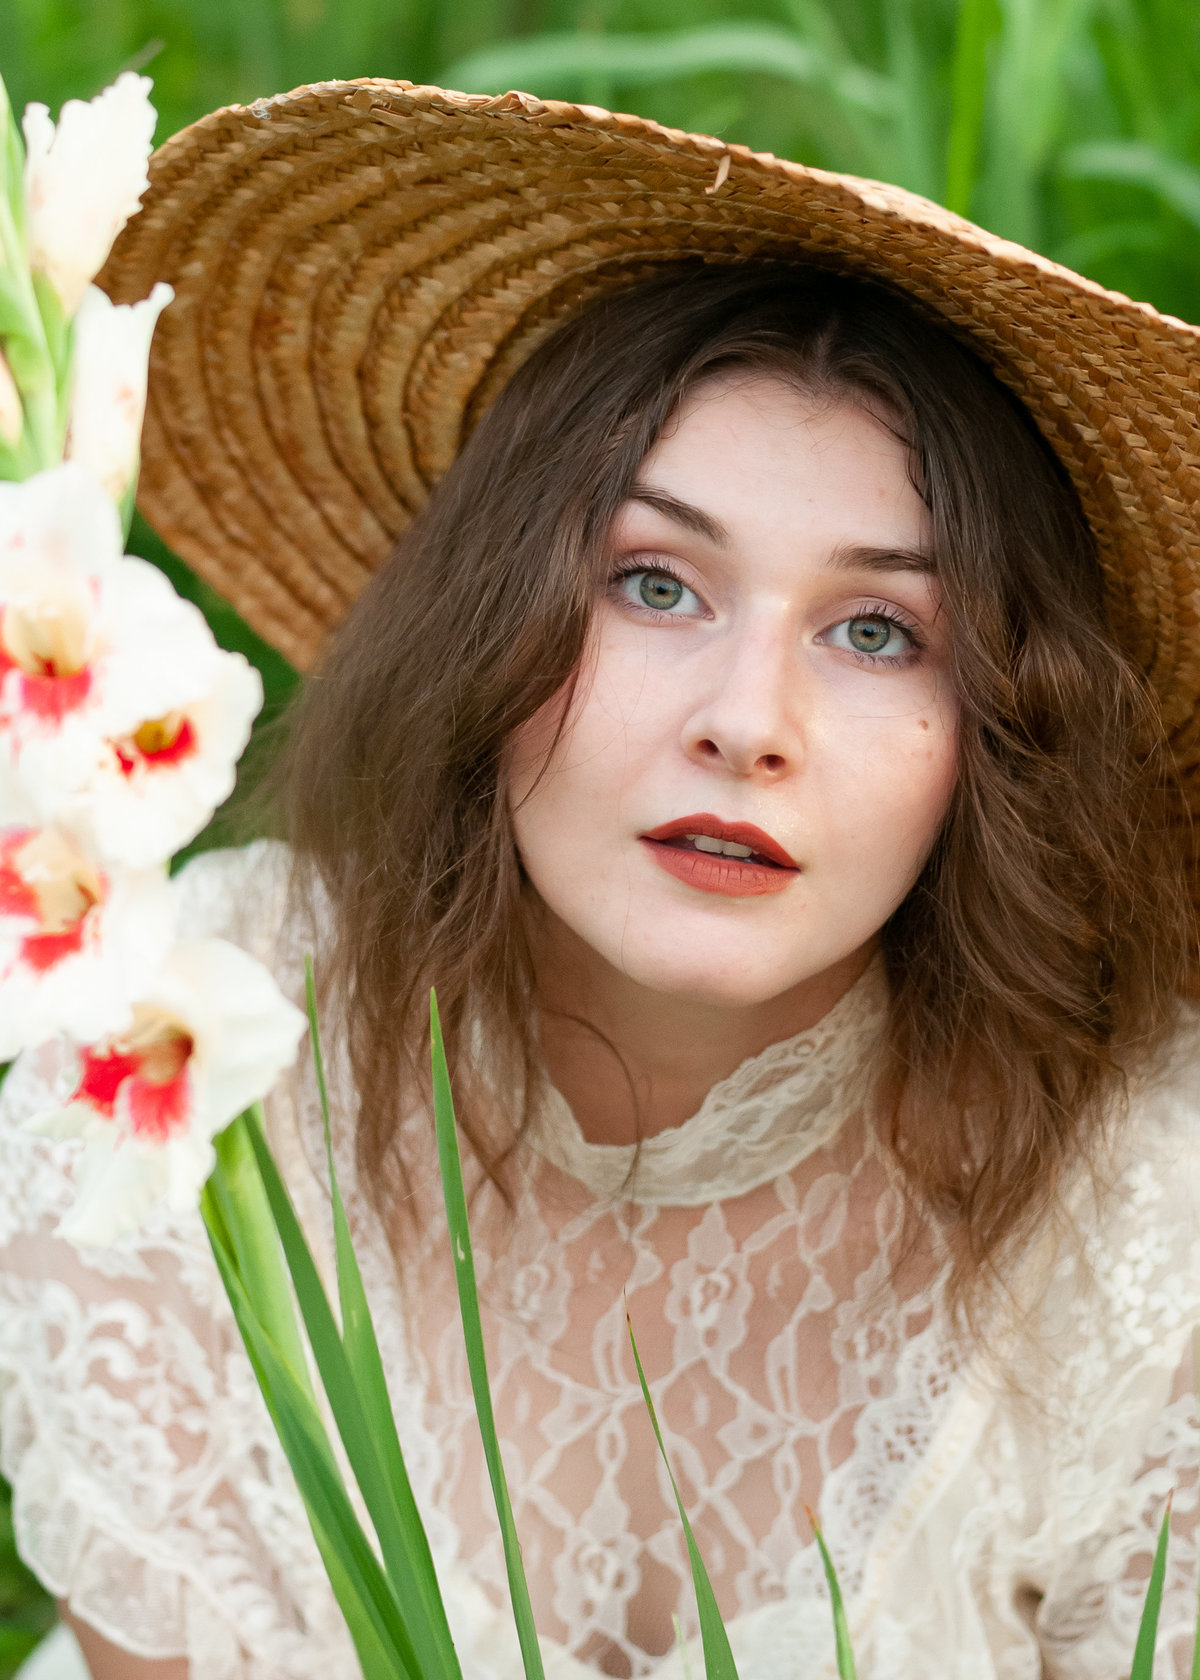 Bowling Green KY Photographer: Portrait of a woman wearing a hat in a field of flowers.